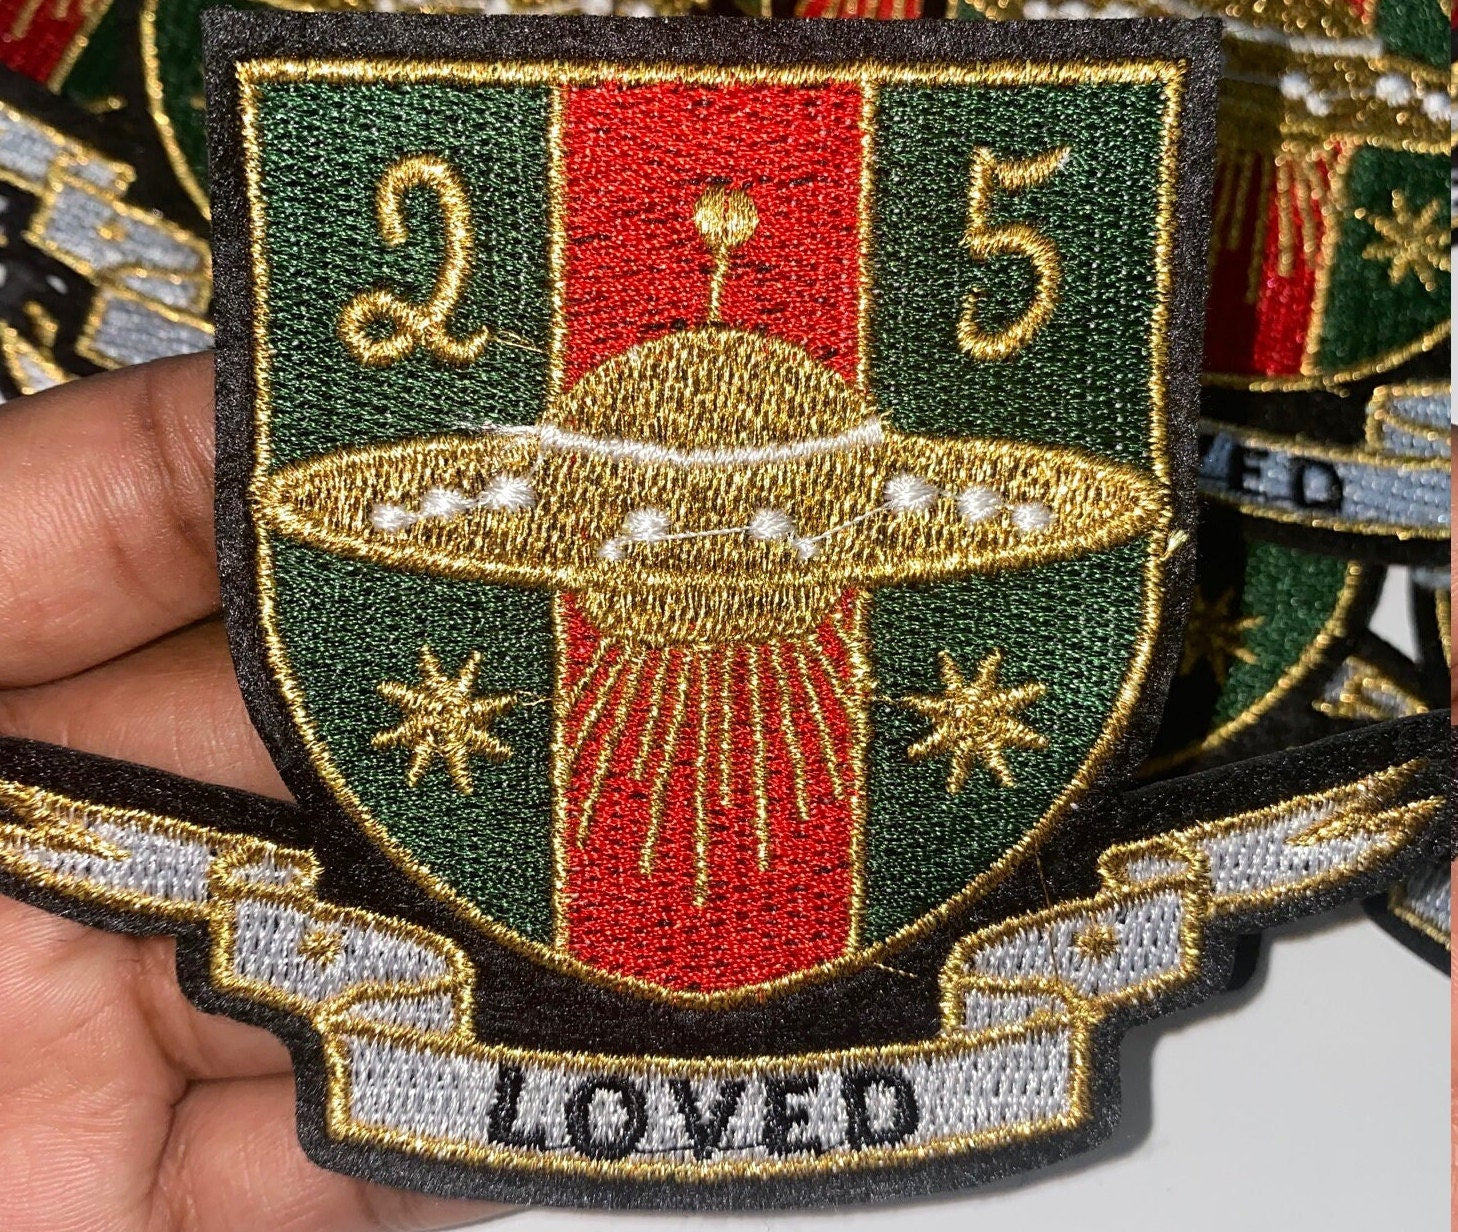 NEW, Vintage "25 LOVED" Spaceship, Red/Green/Gold Metallic Emblem patch, DIY, Embroidered Applique Iron On Patch, Size 3.5", 1-pc